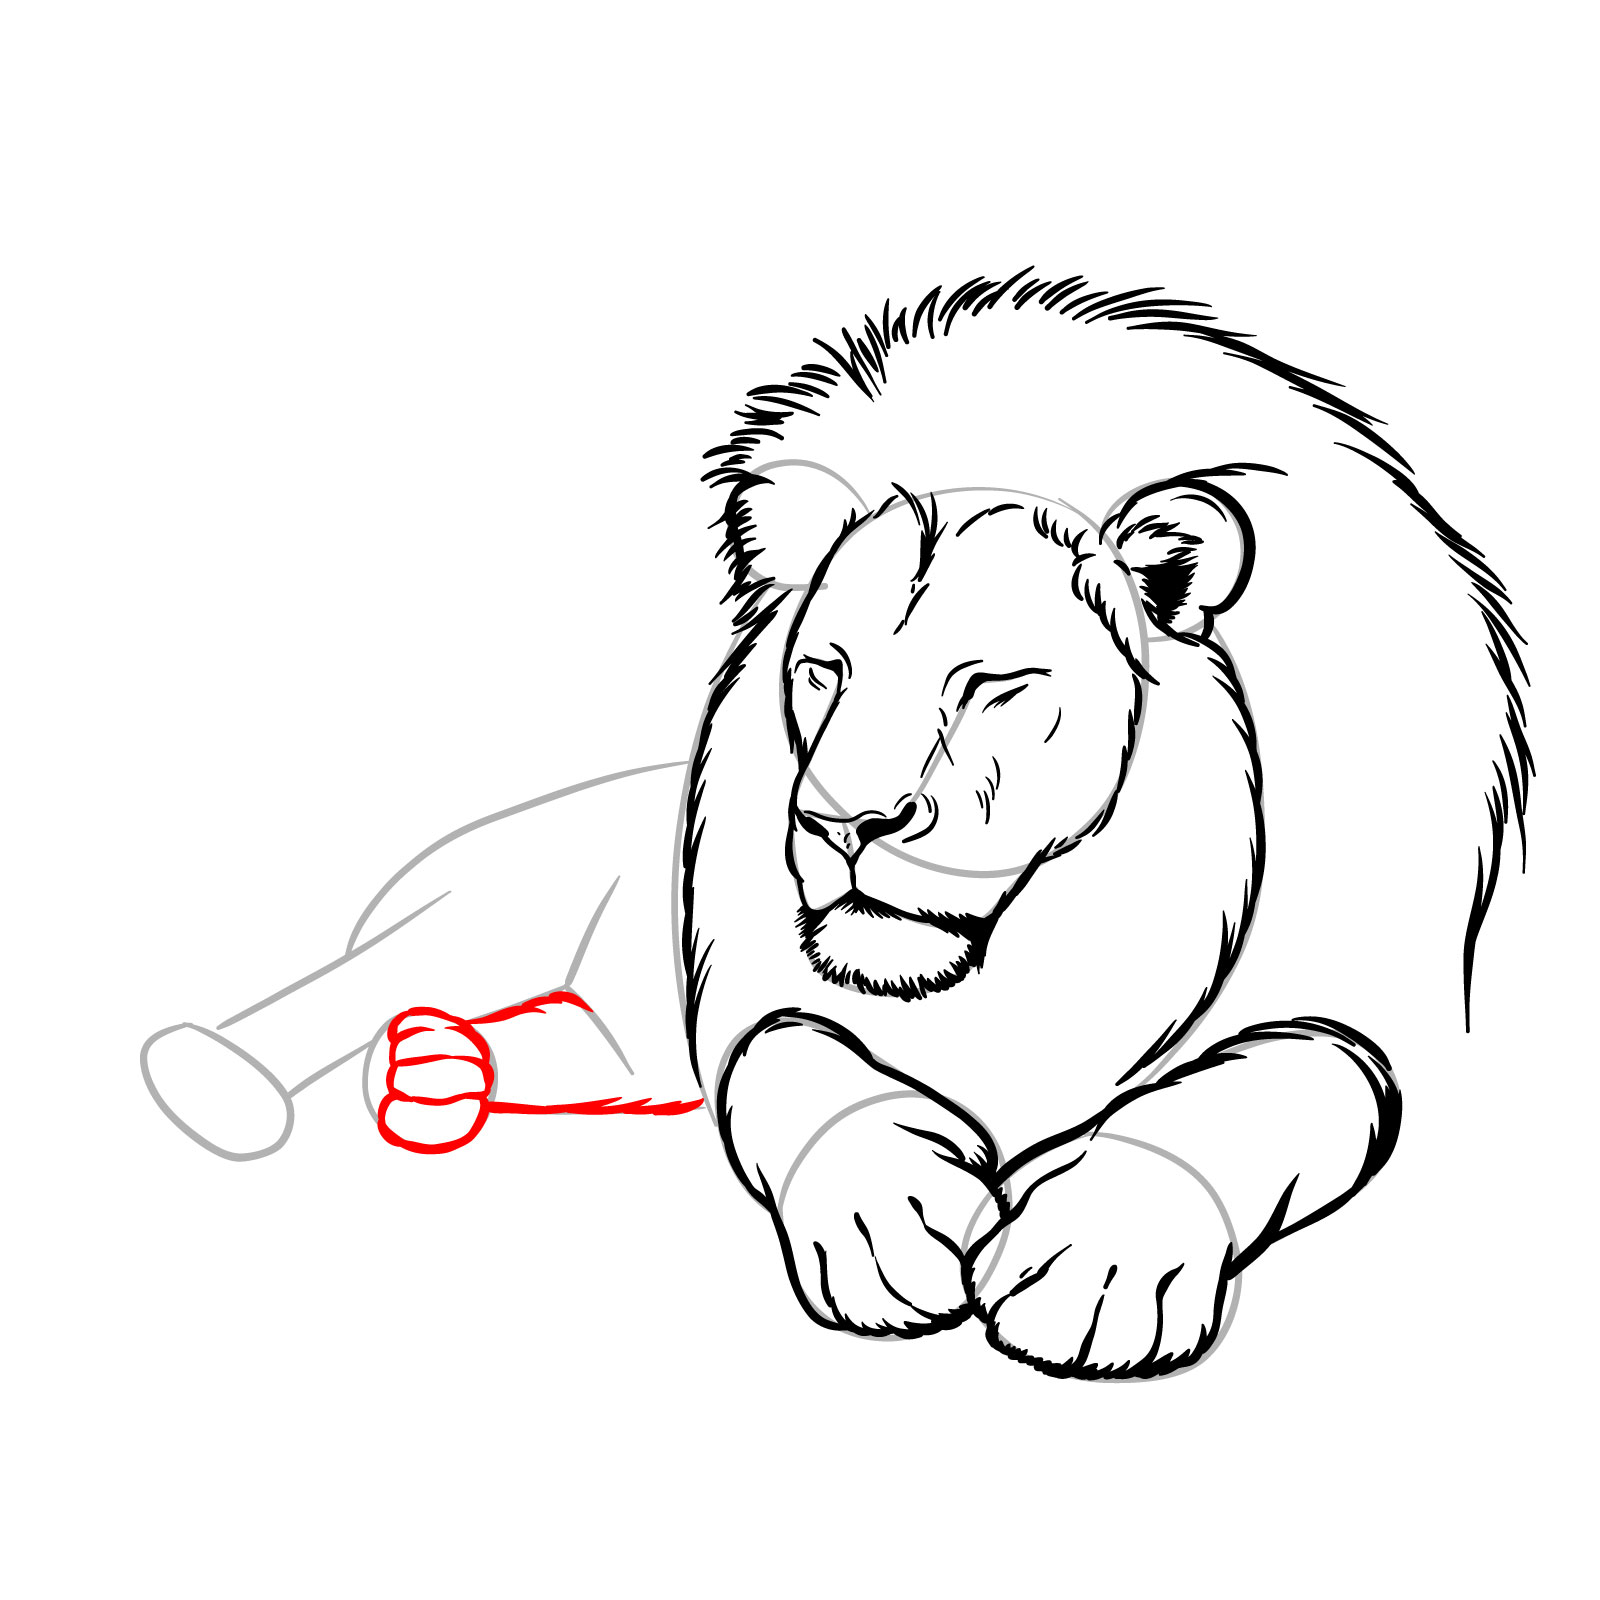 How to draw a sleeping lion in front view - Step 11: Drawing the first rear leg with toes